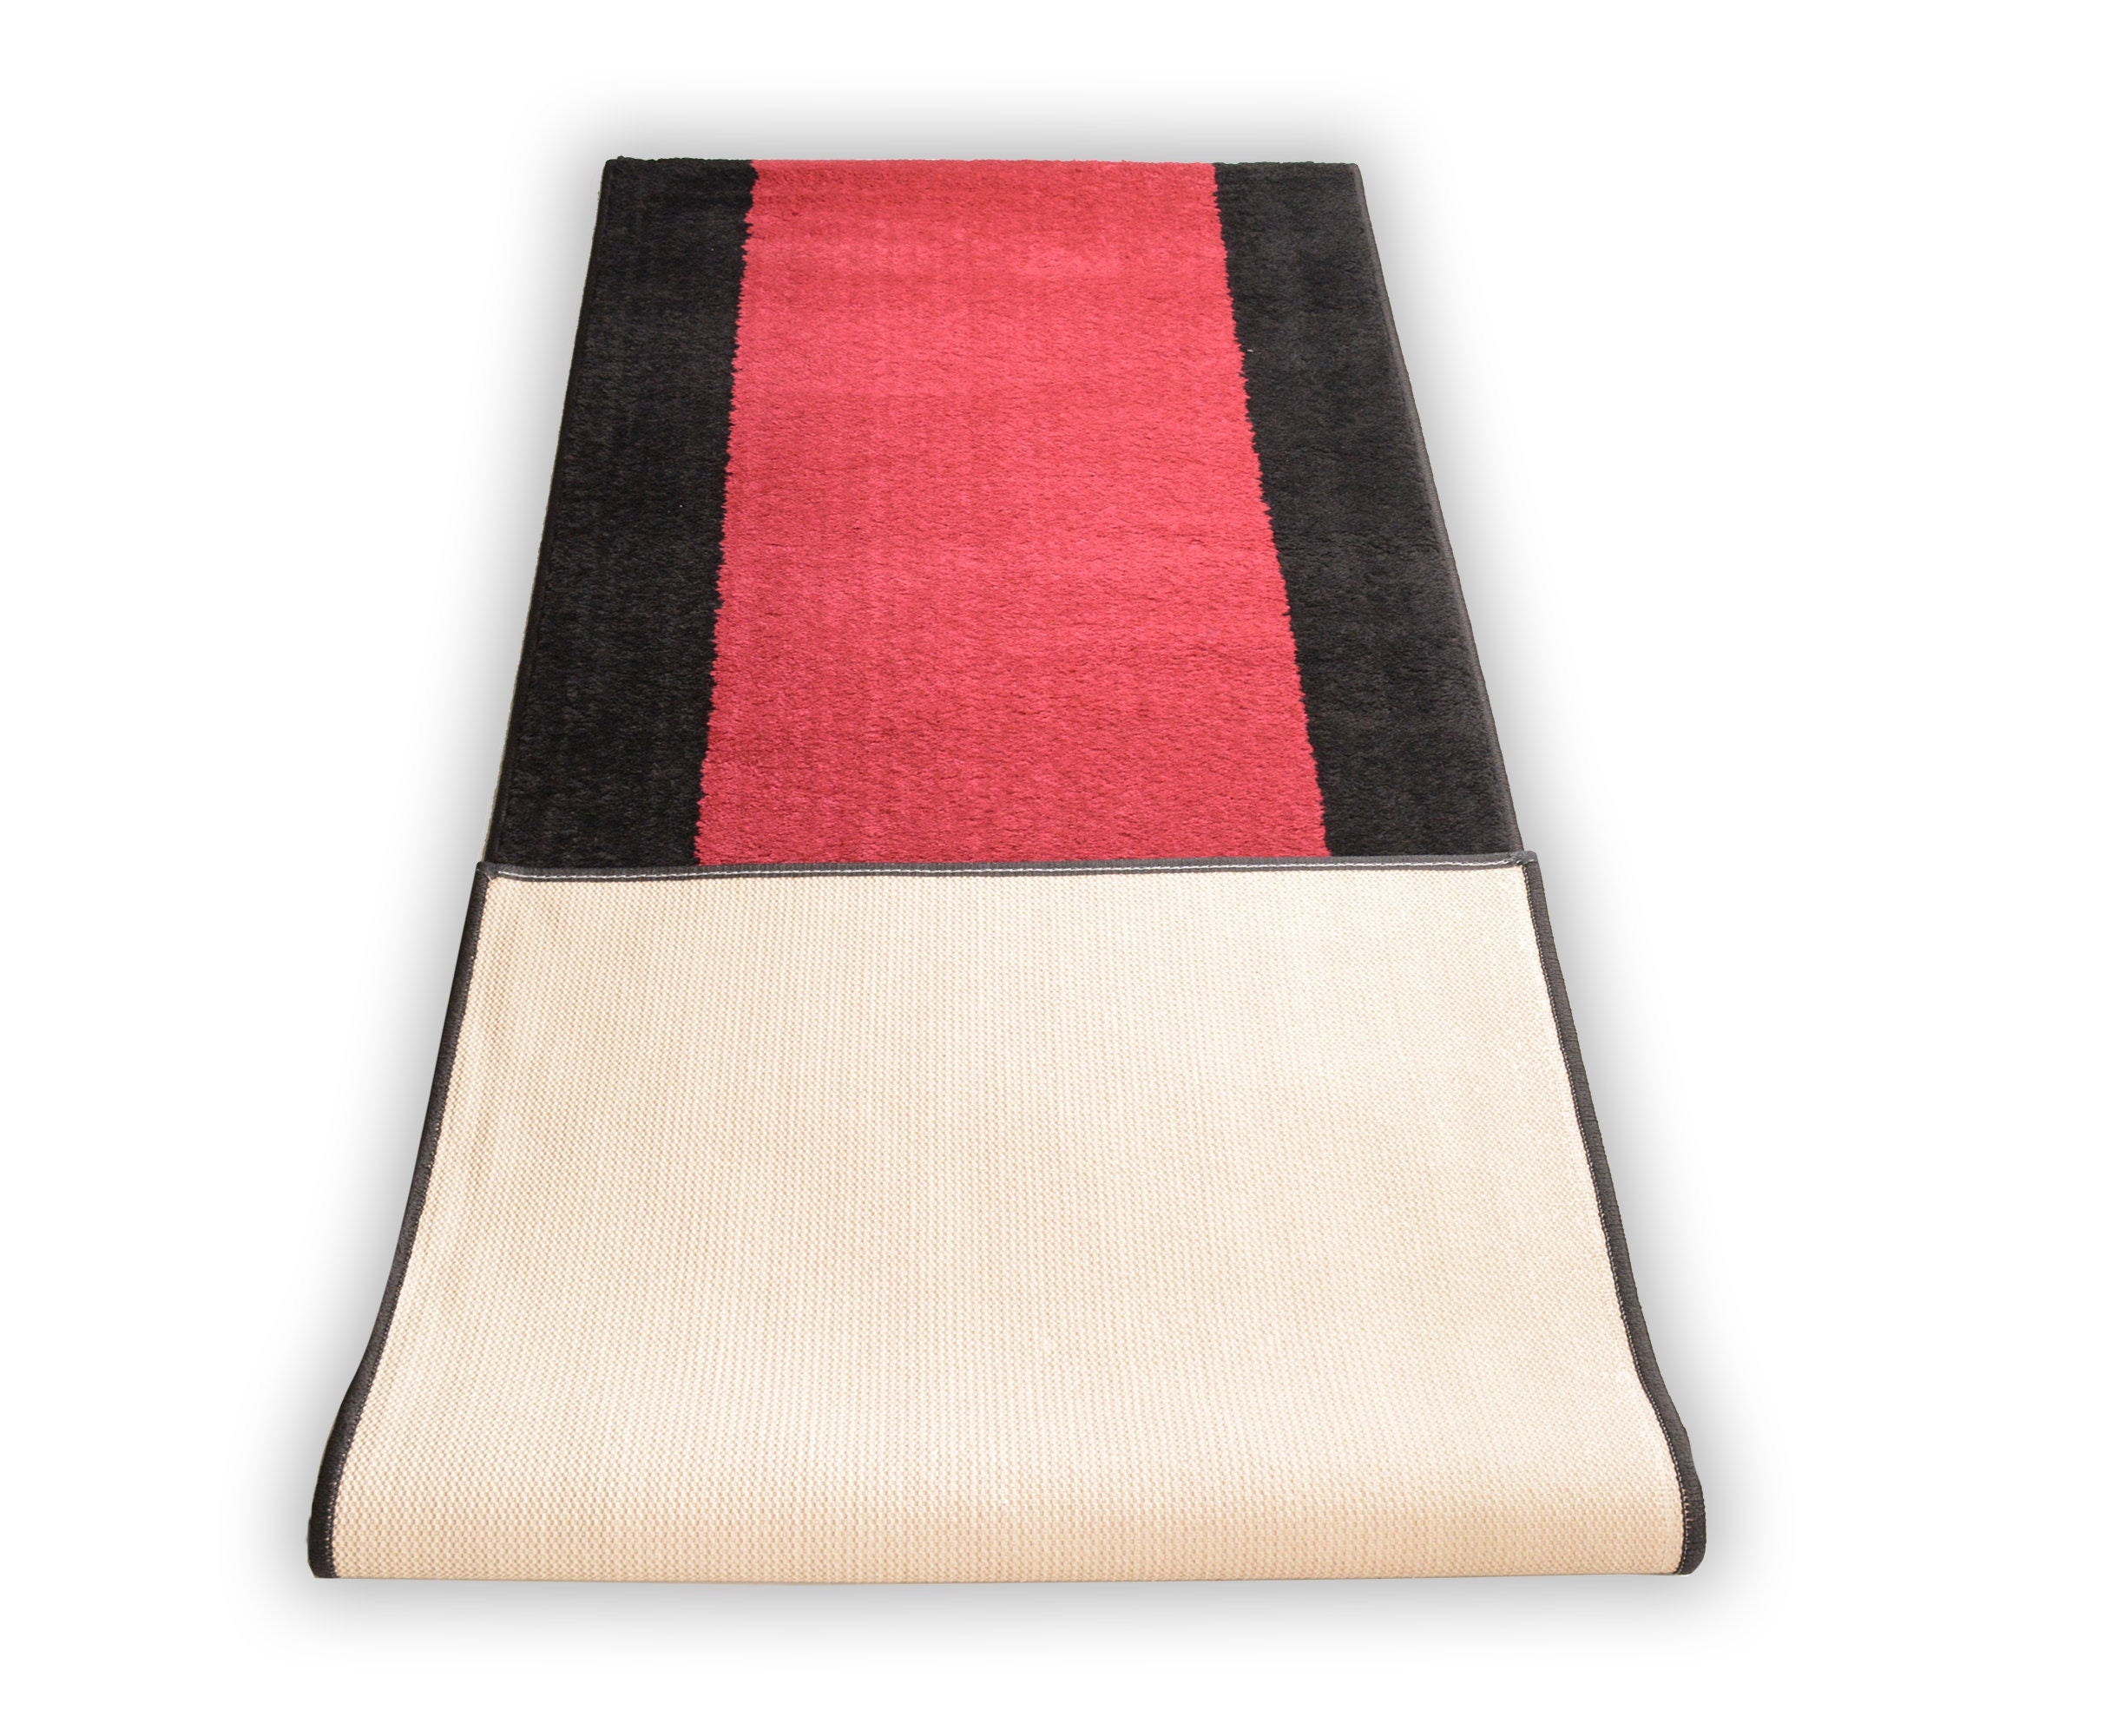 Custom Size Runner Rug Red with Black Bordered 25" Width Choice of Your Length Cut to Size by Feet Skid Slip Resistant Customize Rug Runner - 0